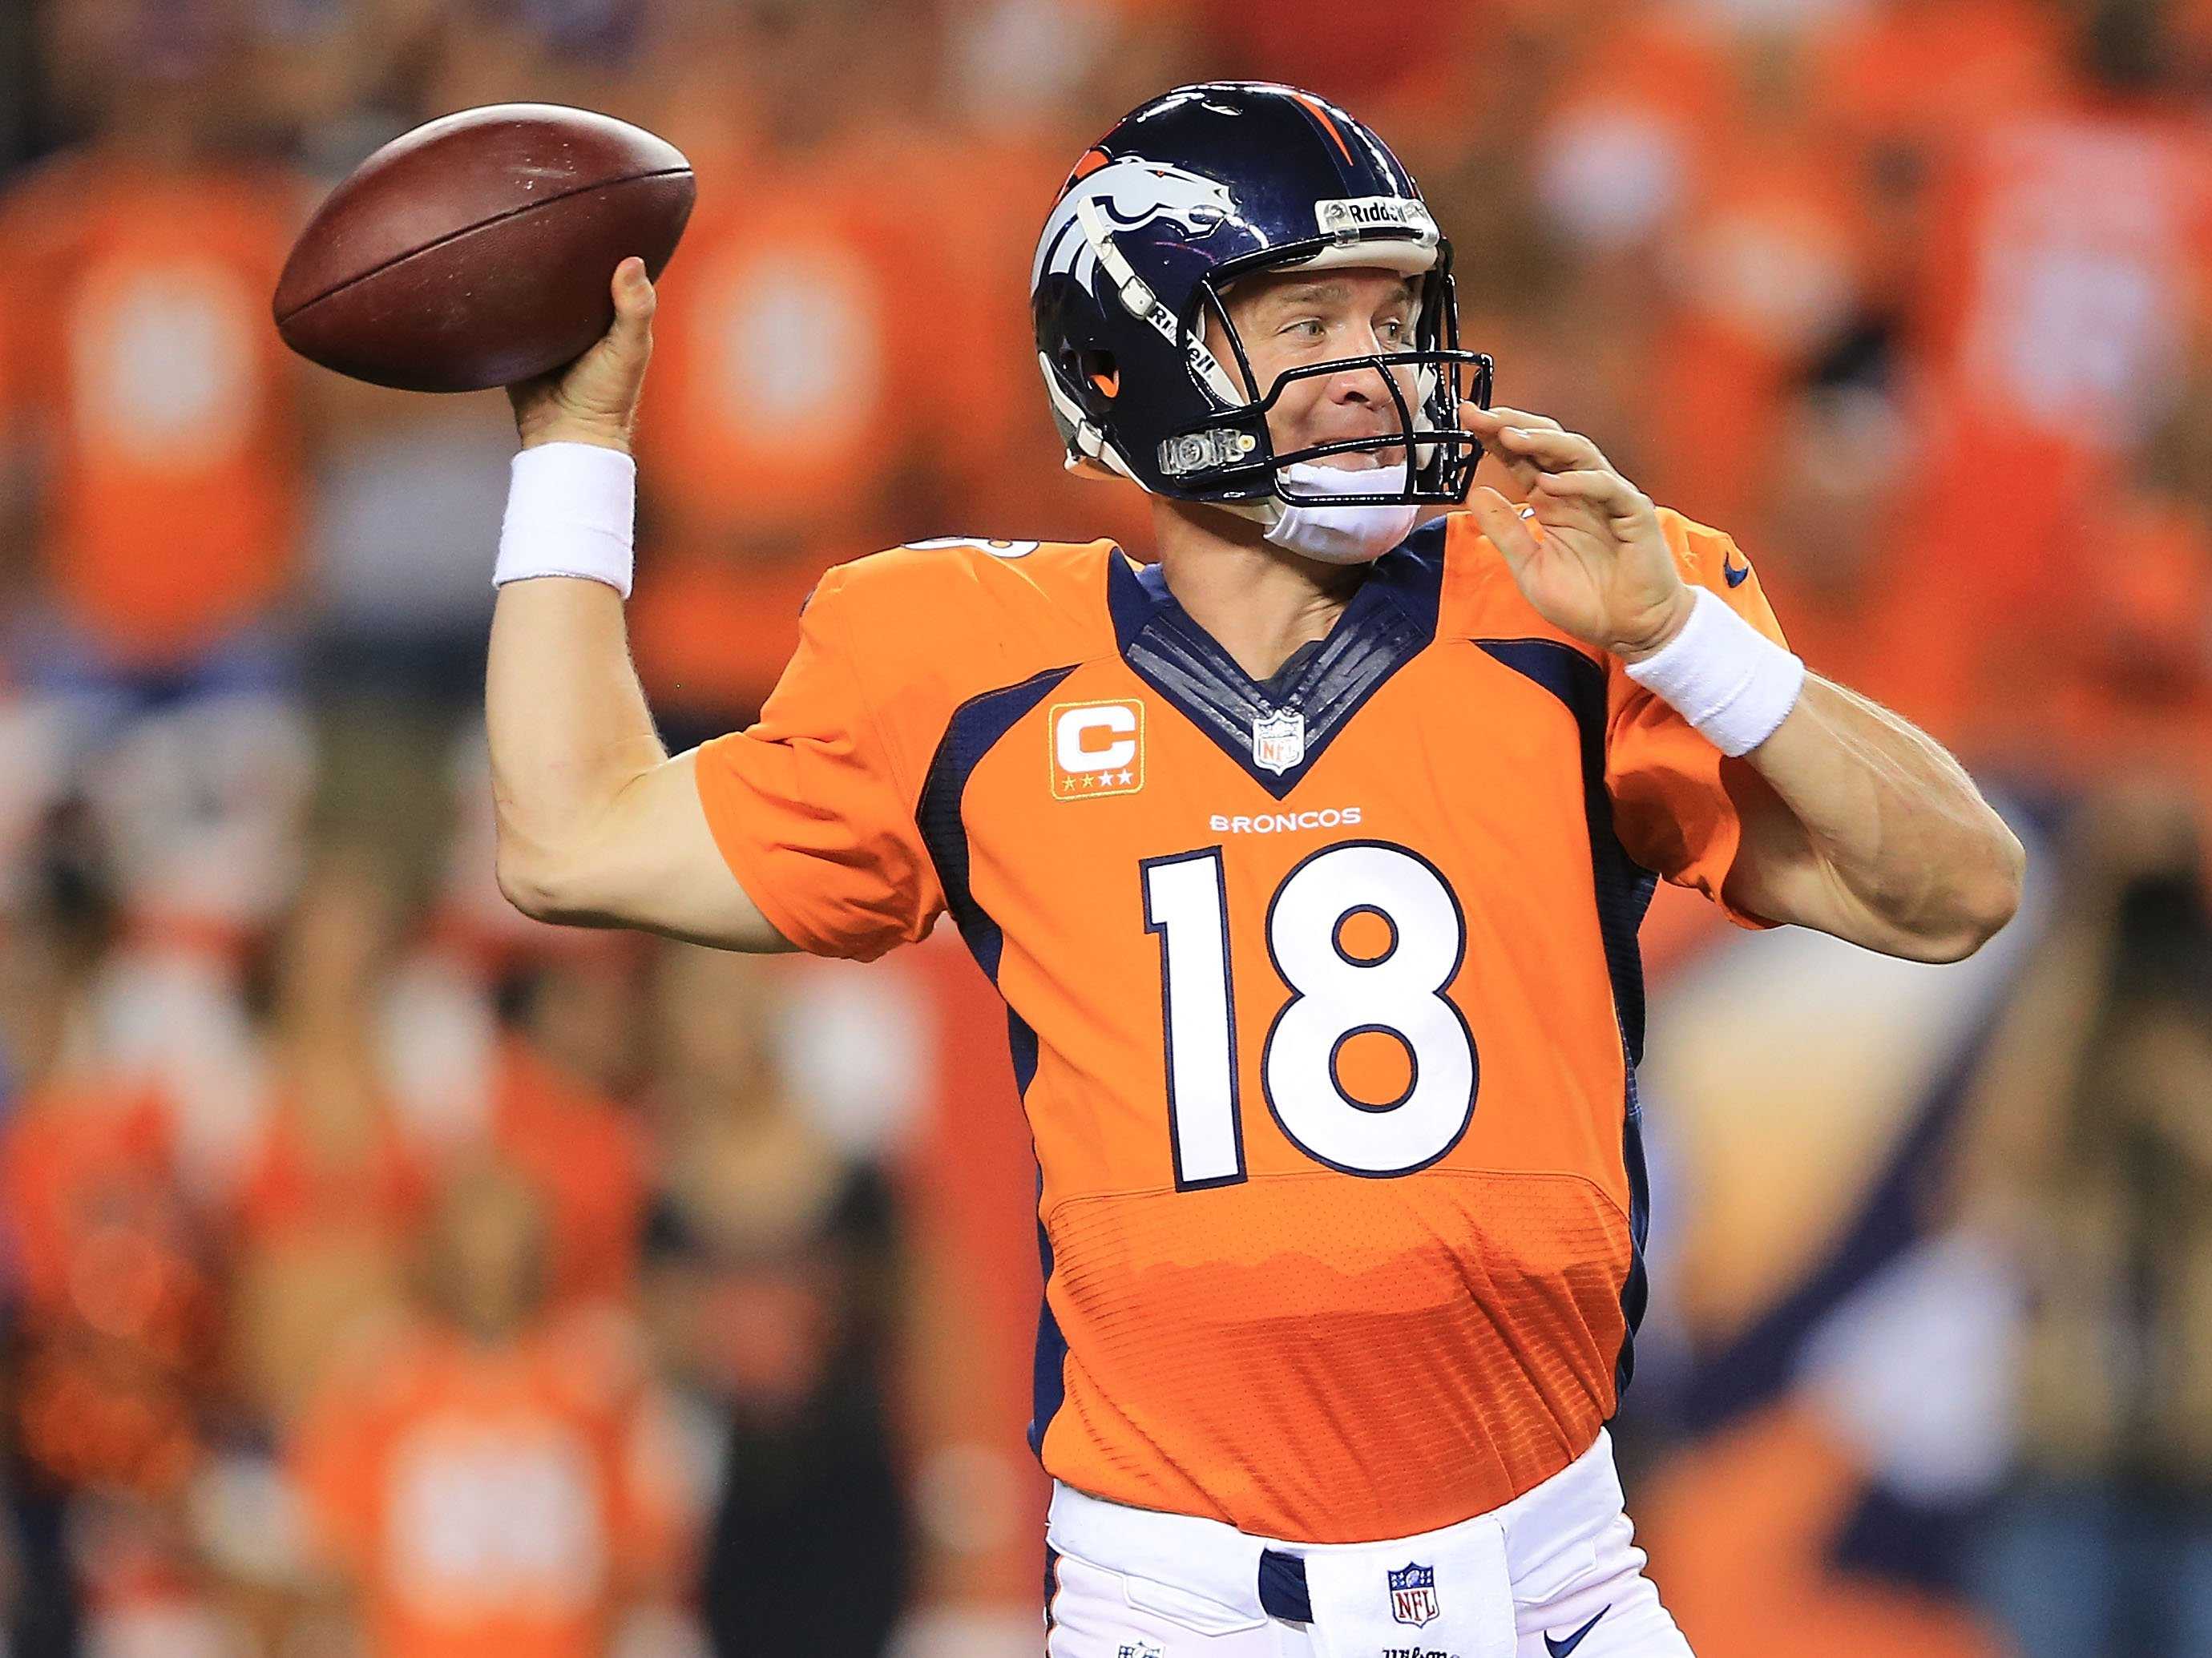 VIDEO: Peyton Manning Ties NFL Record With 7 Touchdown Passes In A